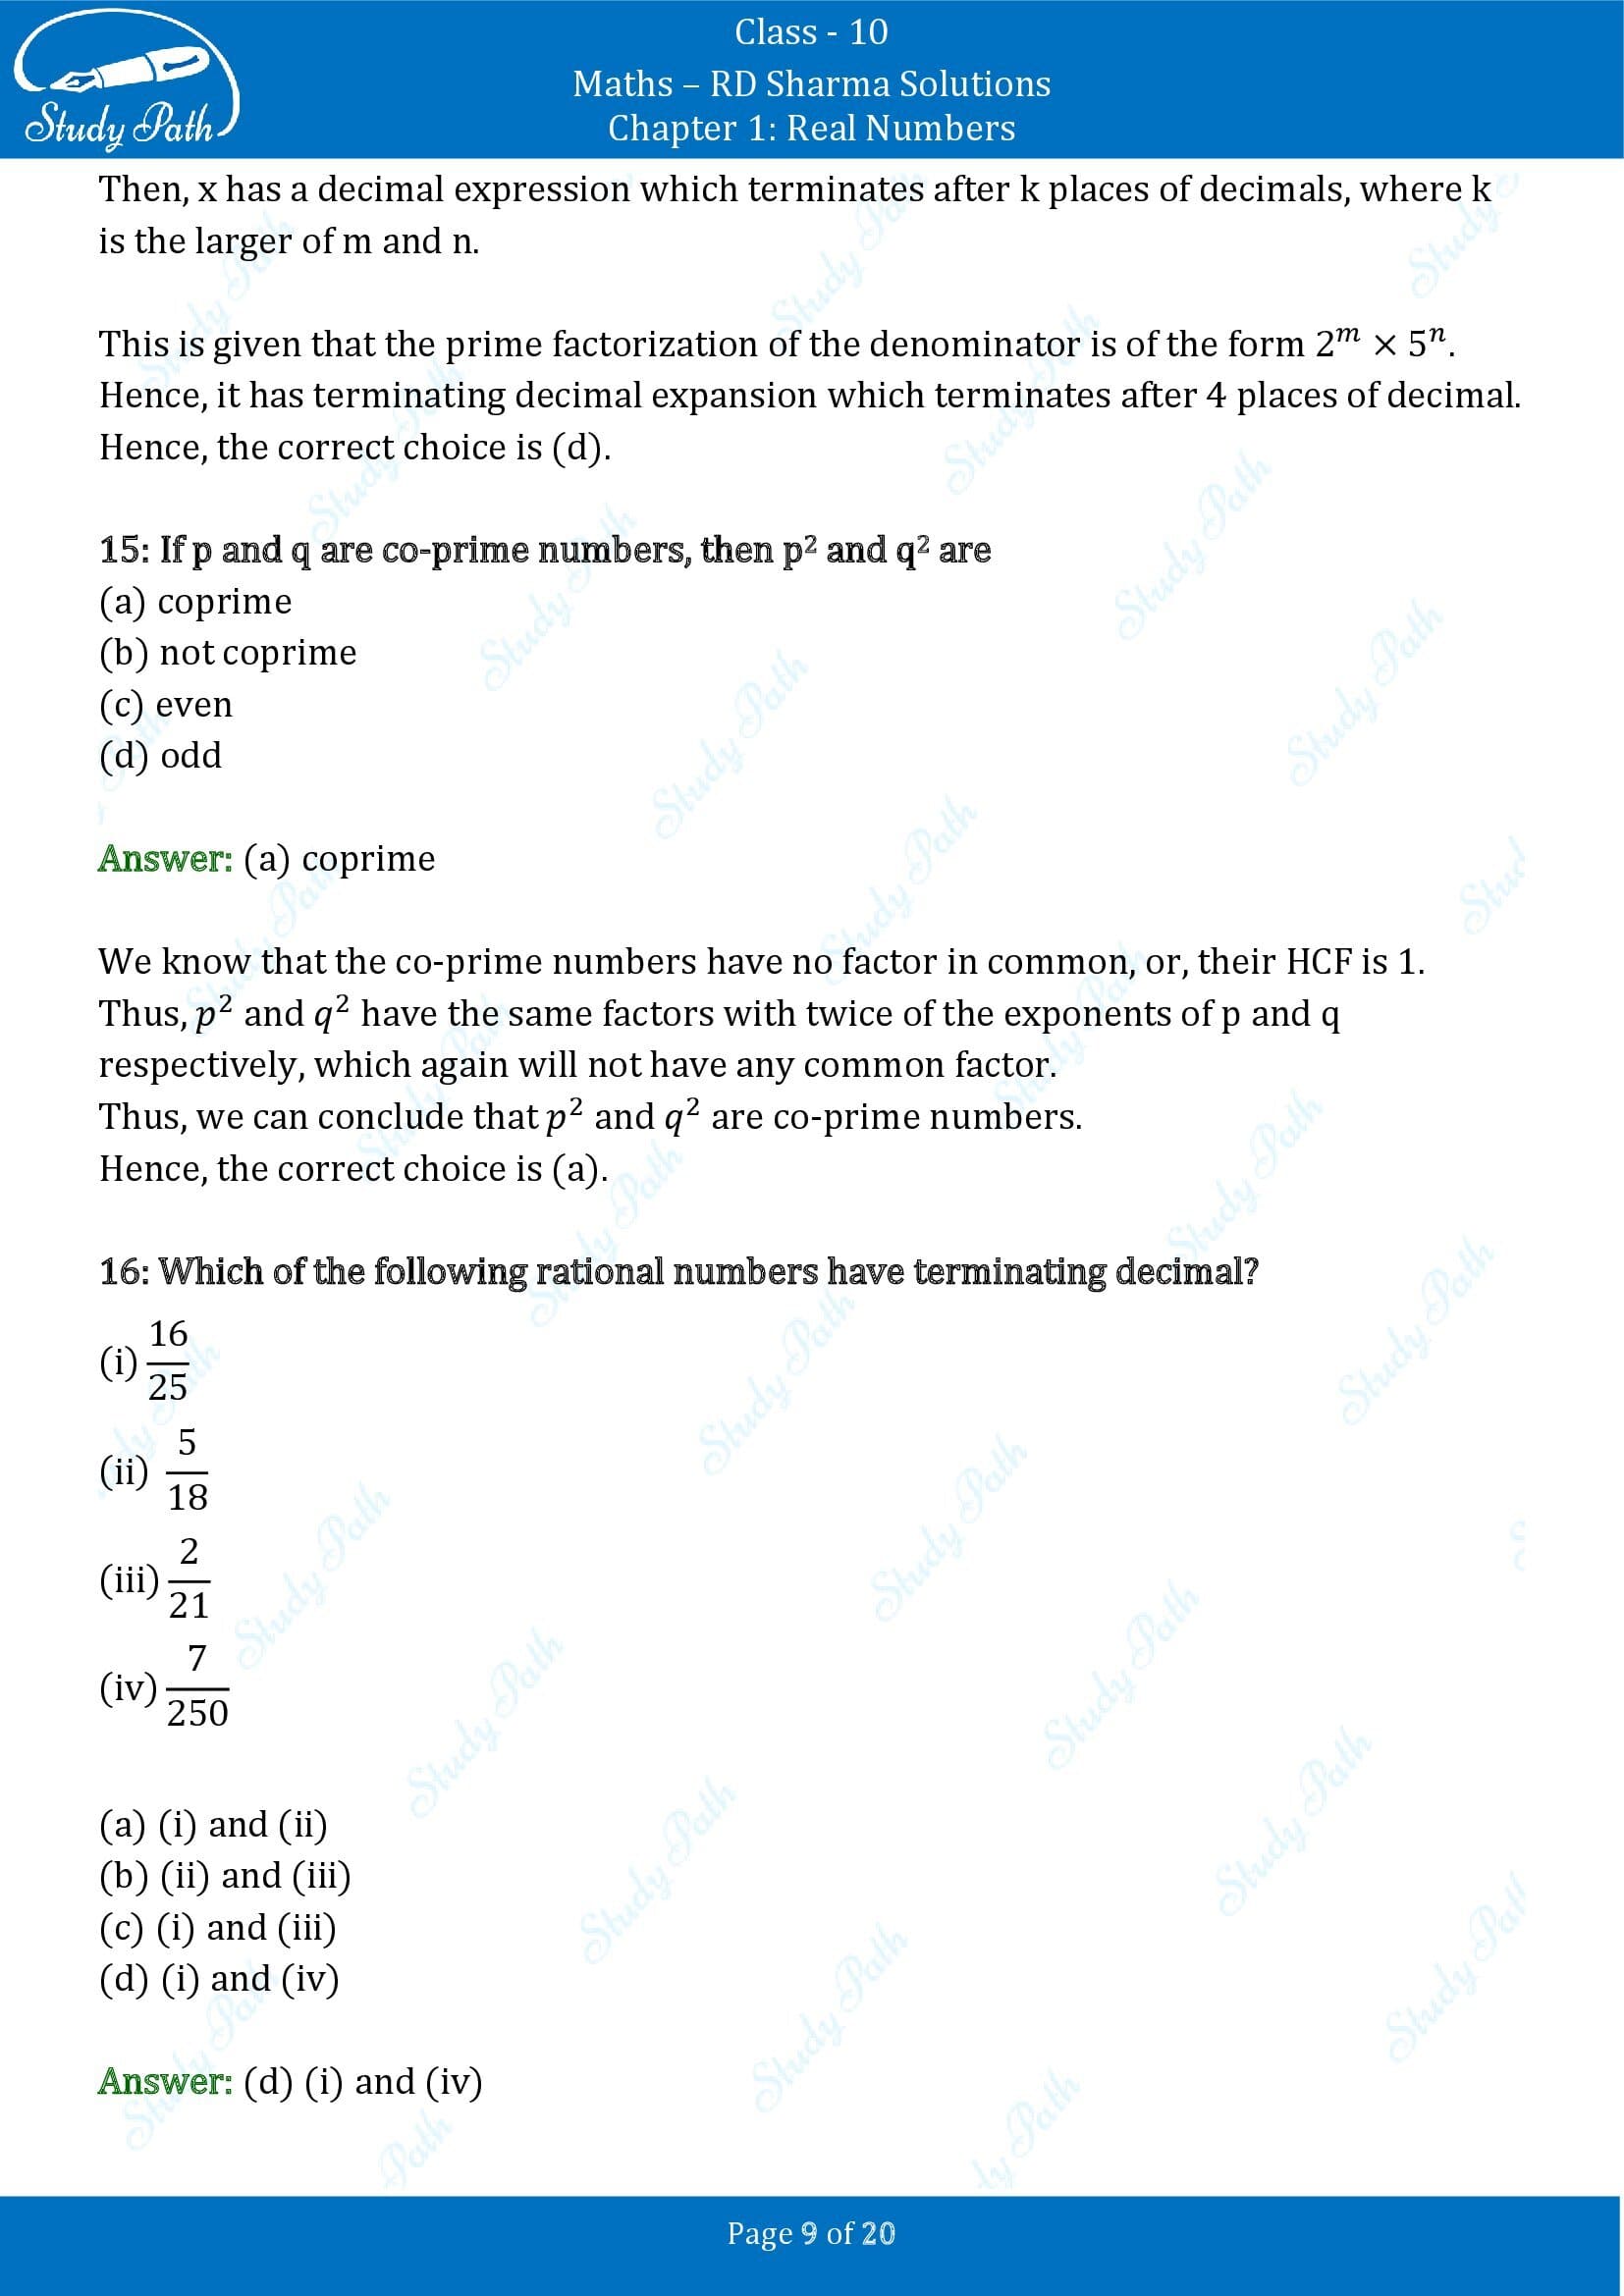 RD Sharma Solutions Class 10 Chapter 1 Real Numbers Multiple Choice Questions MCQs 00009